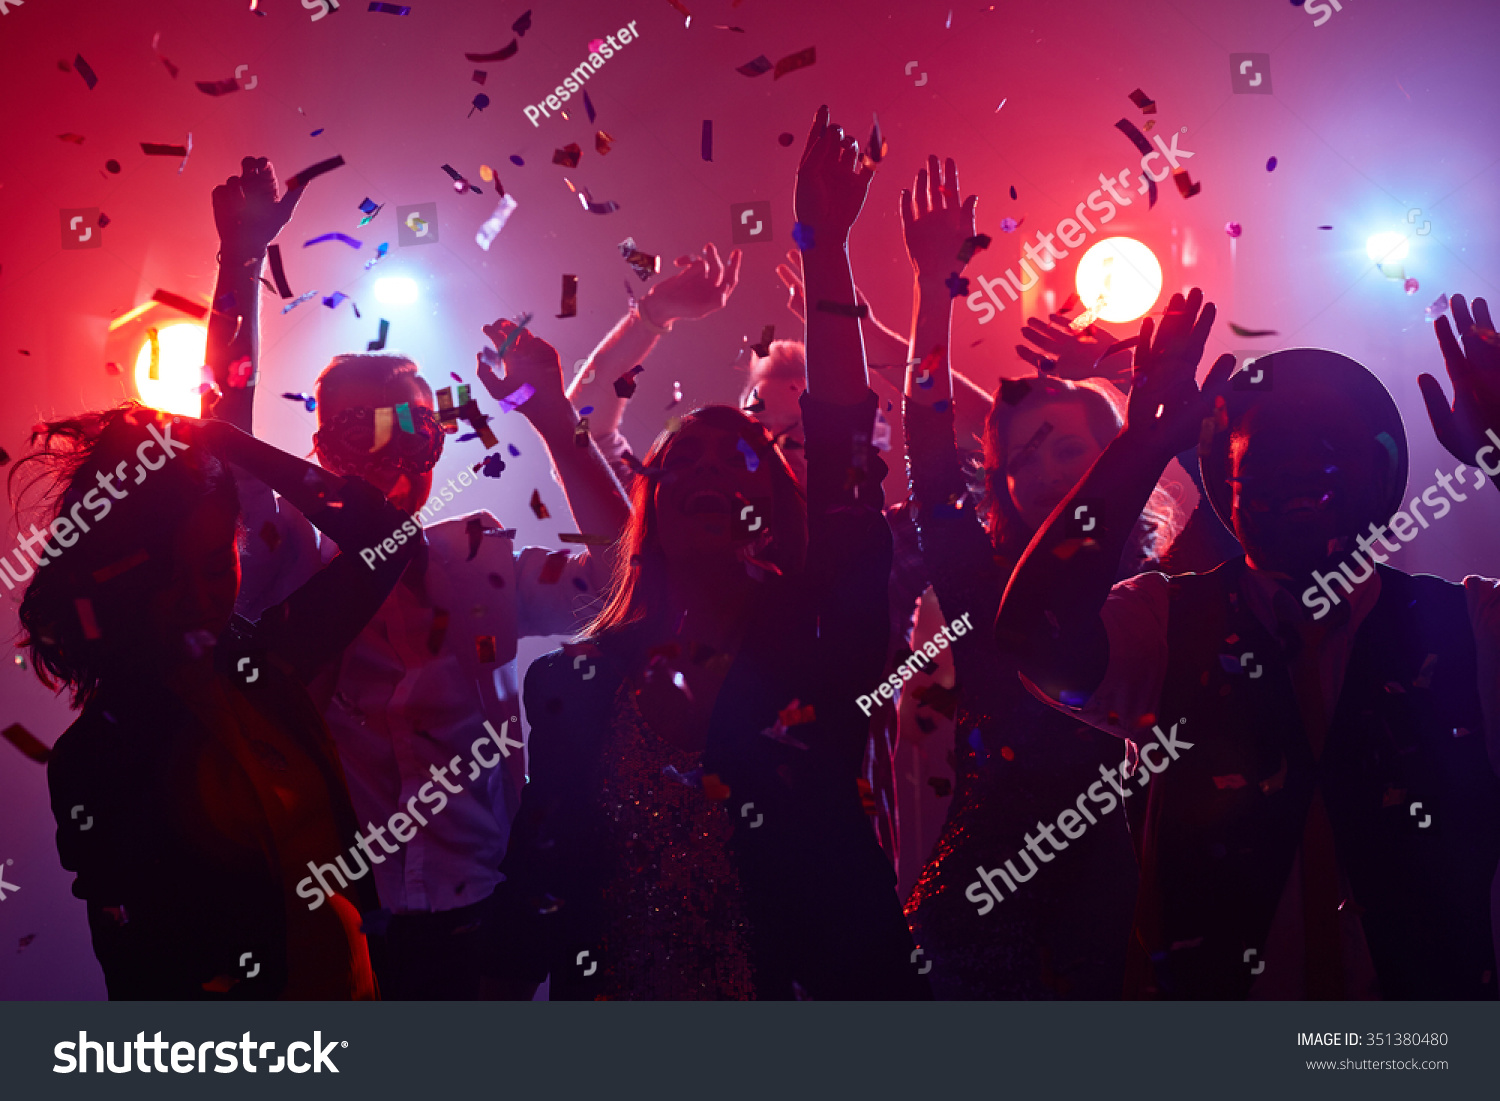 Young People Dancing In Night Club Stock Photo 351380480 : Shutterstock